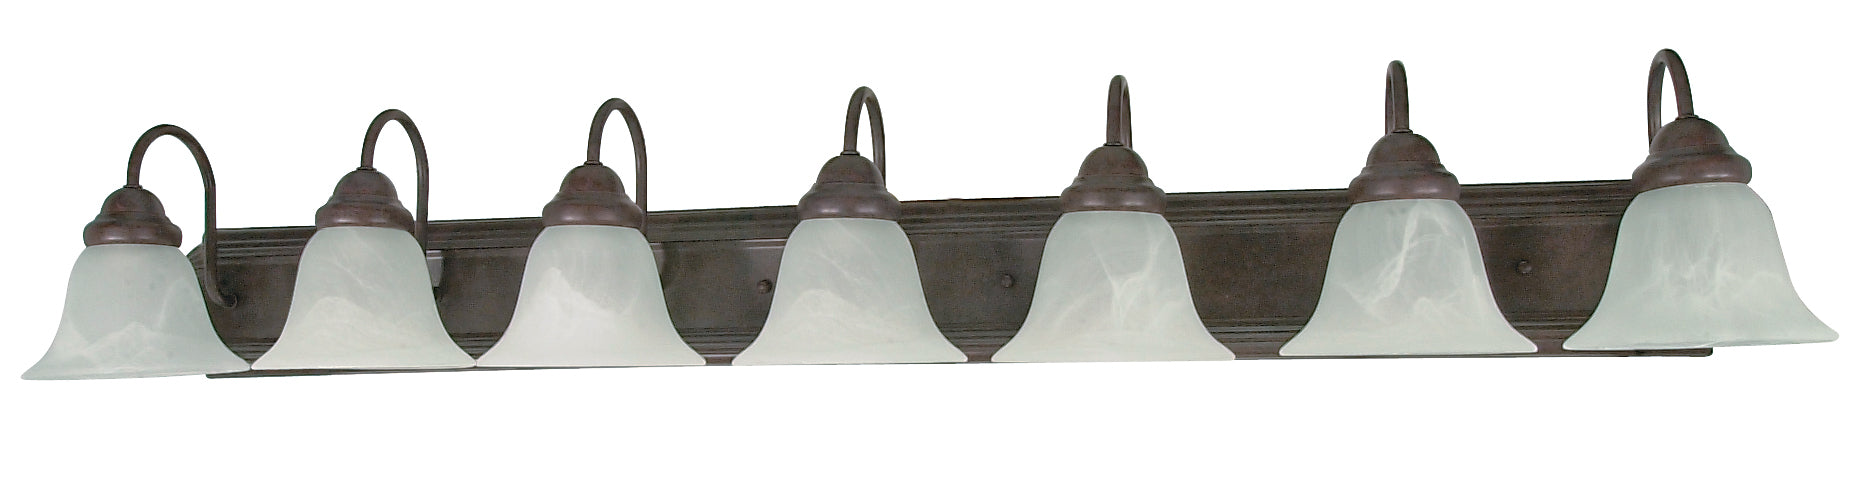 SATCO/NUVO Ballerina 7-Light 48 Inch Vanity With Alabaster Glass Bell Shades (60-292)